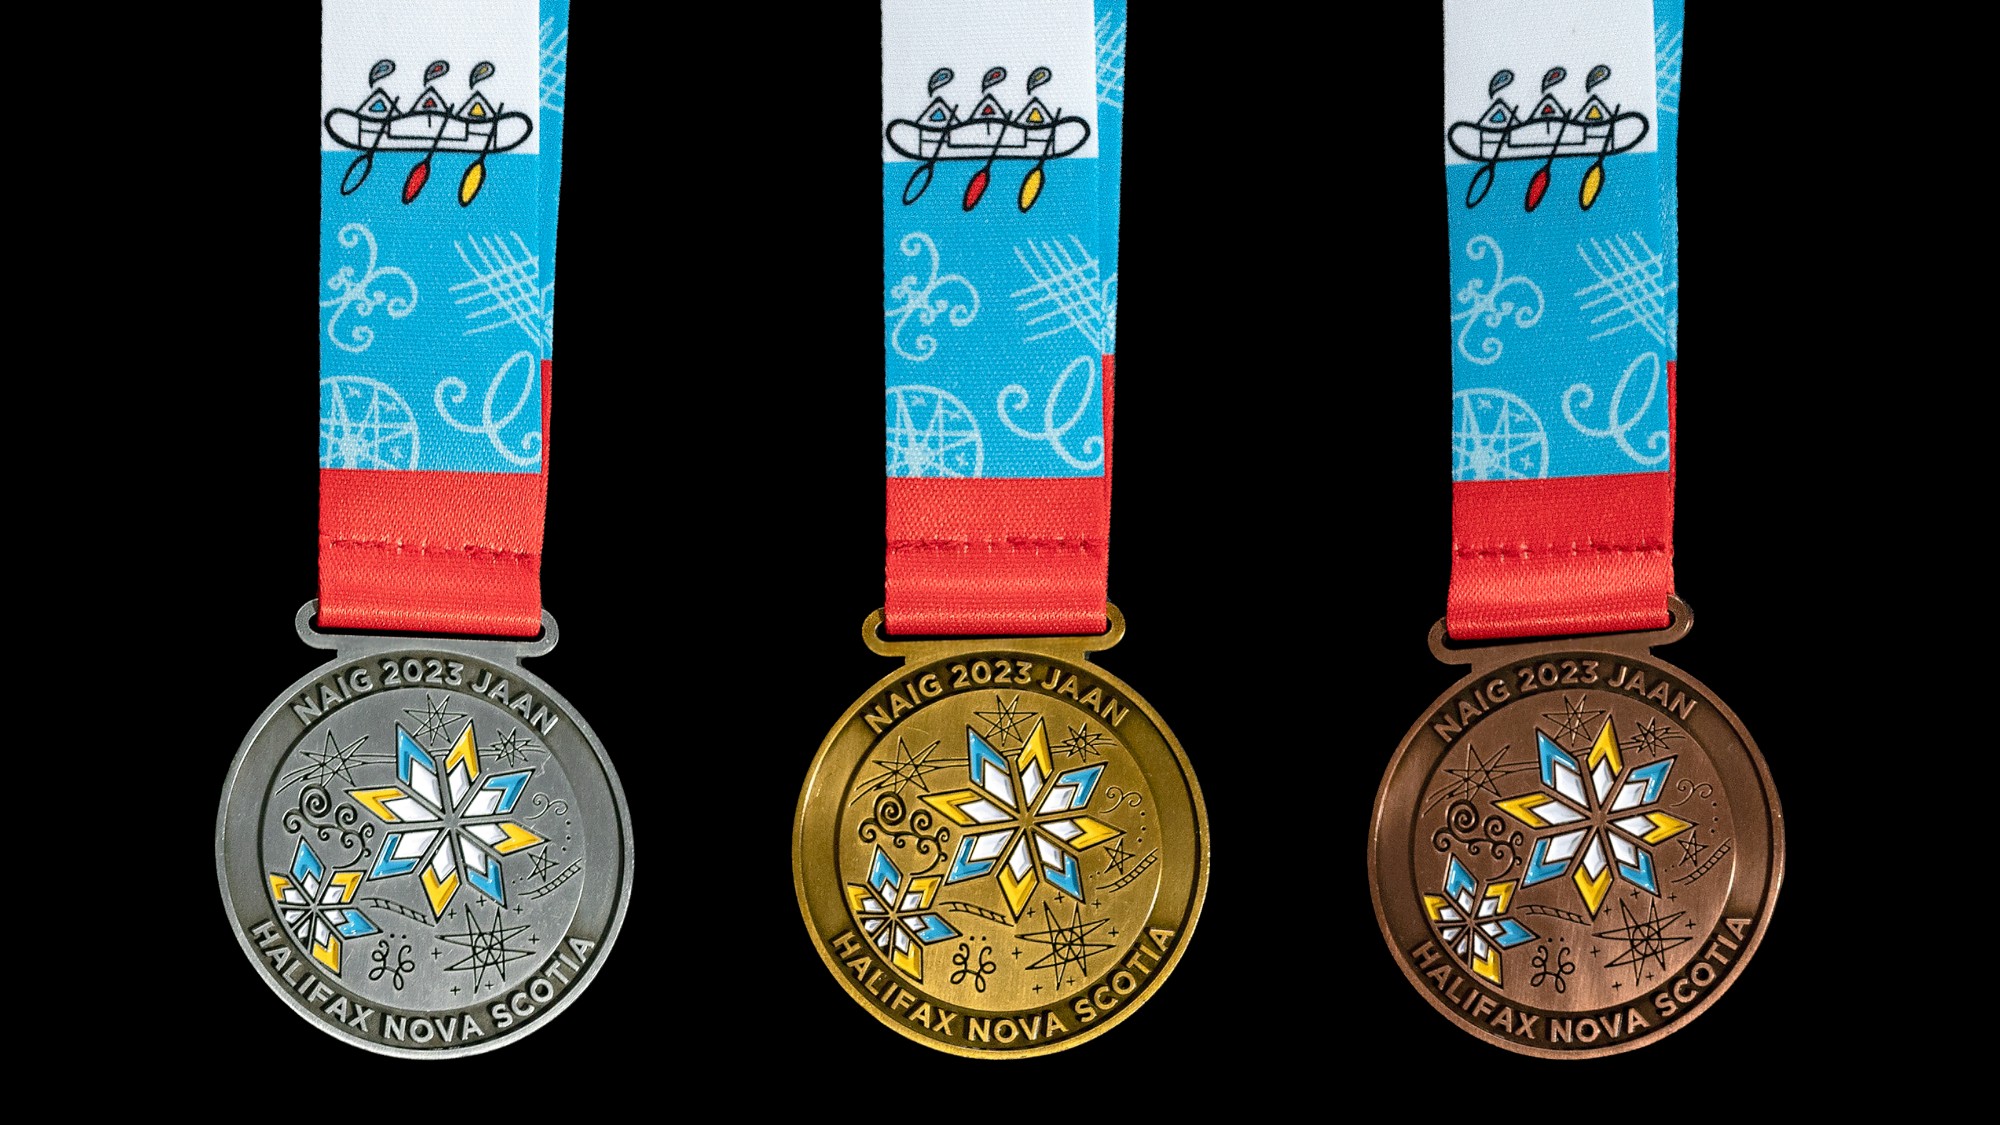 Gold, silver and bronze medals for the 2023 North American Games